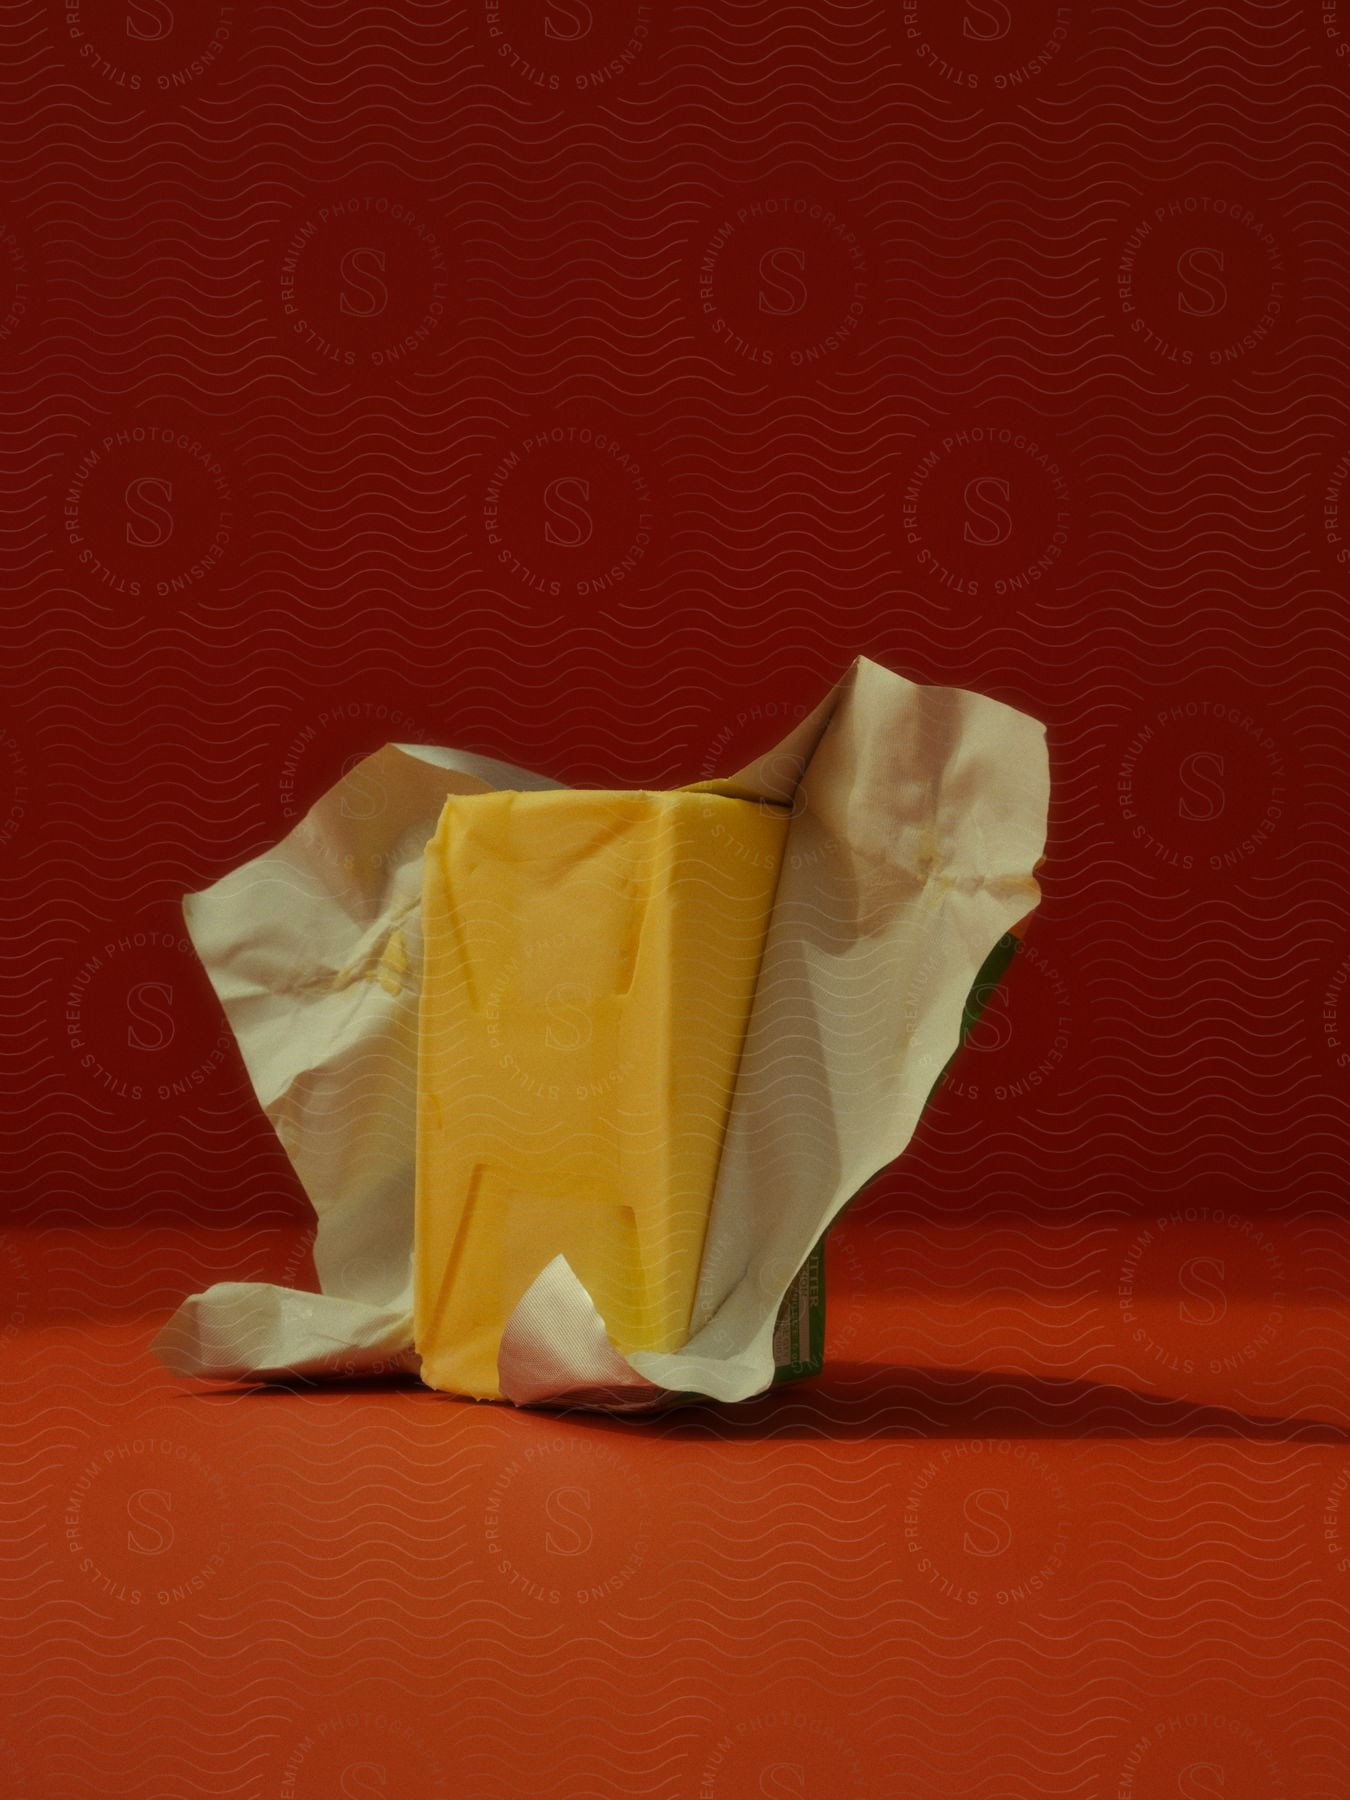 A block of cheese sitting on a table in a room.